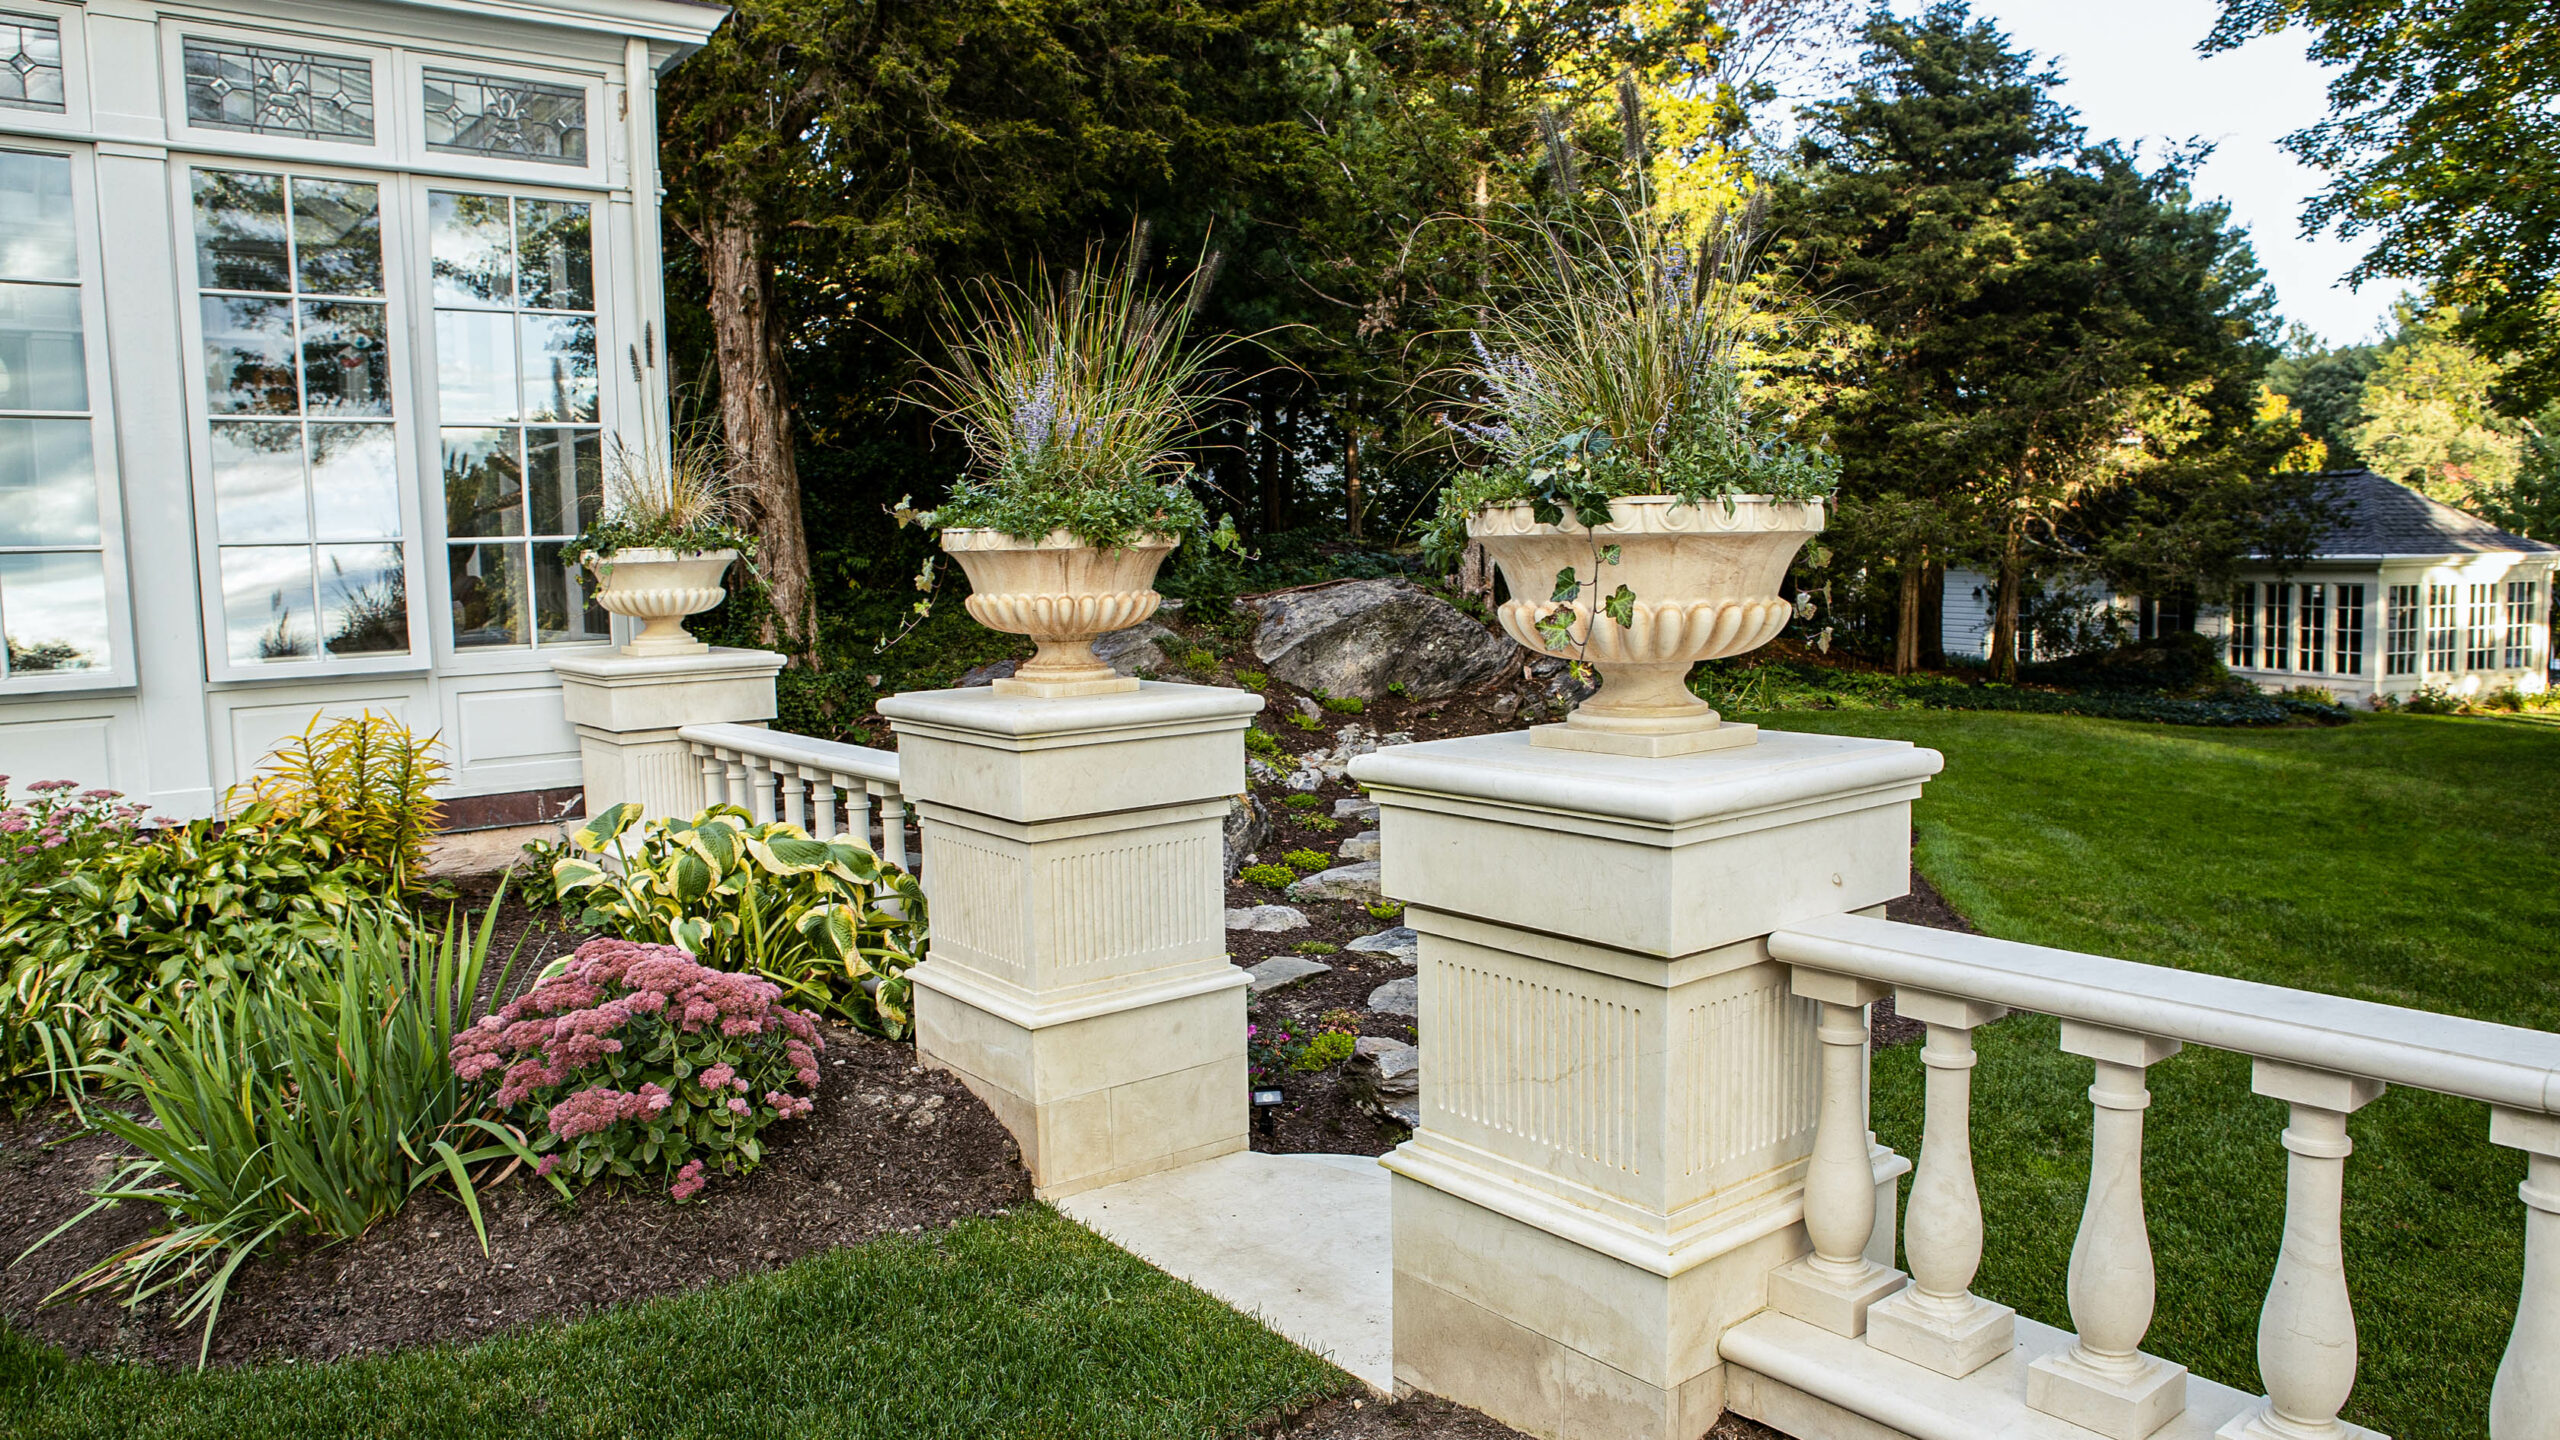 Marble columns with planters on top.